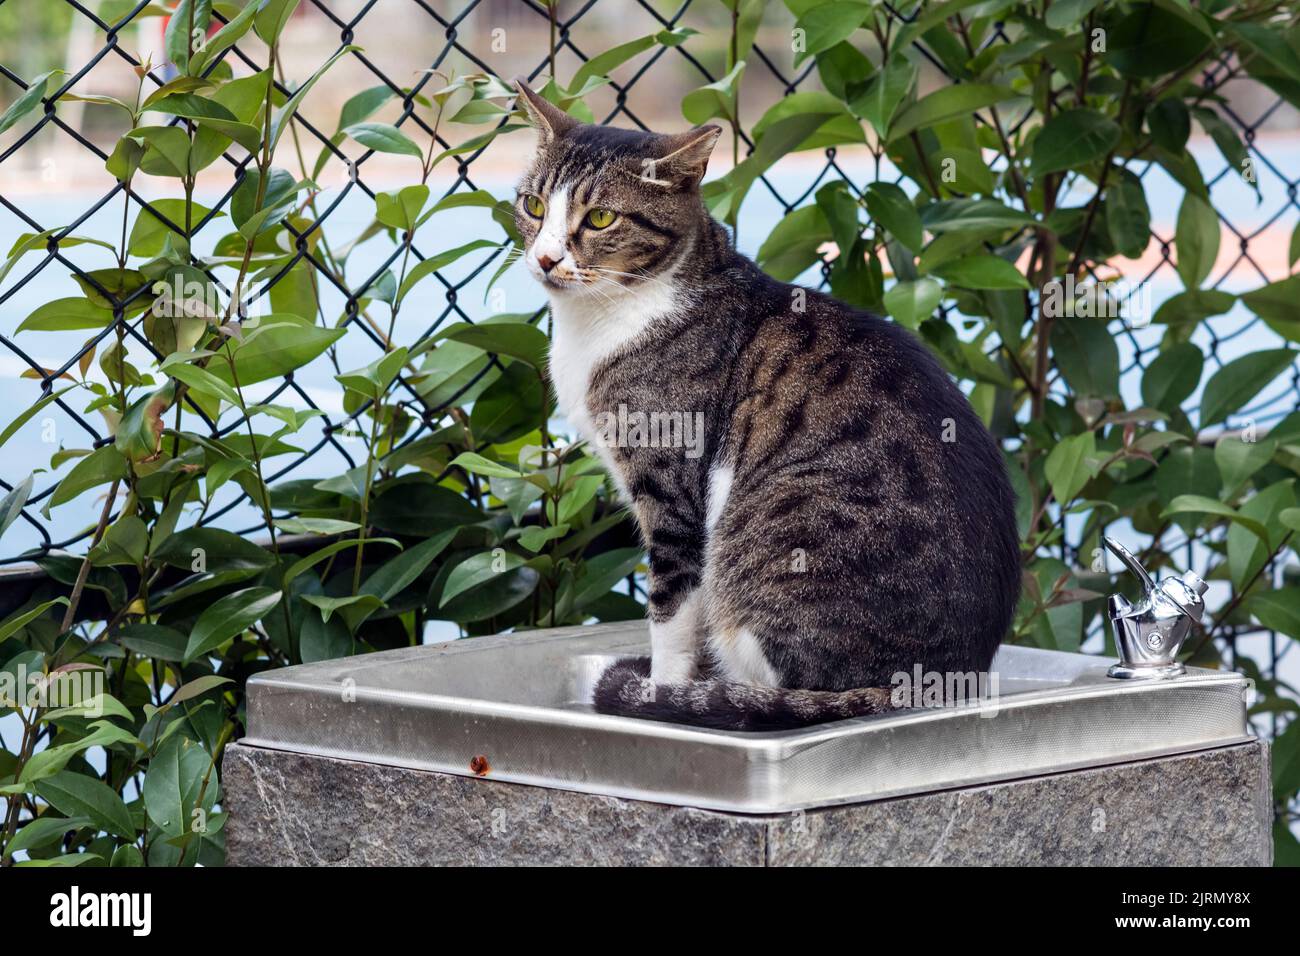 Adult stray mackerel cat sitting on a water dispenser outdoors, in full body portrait with foliage in the background. Stock Photo